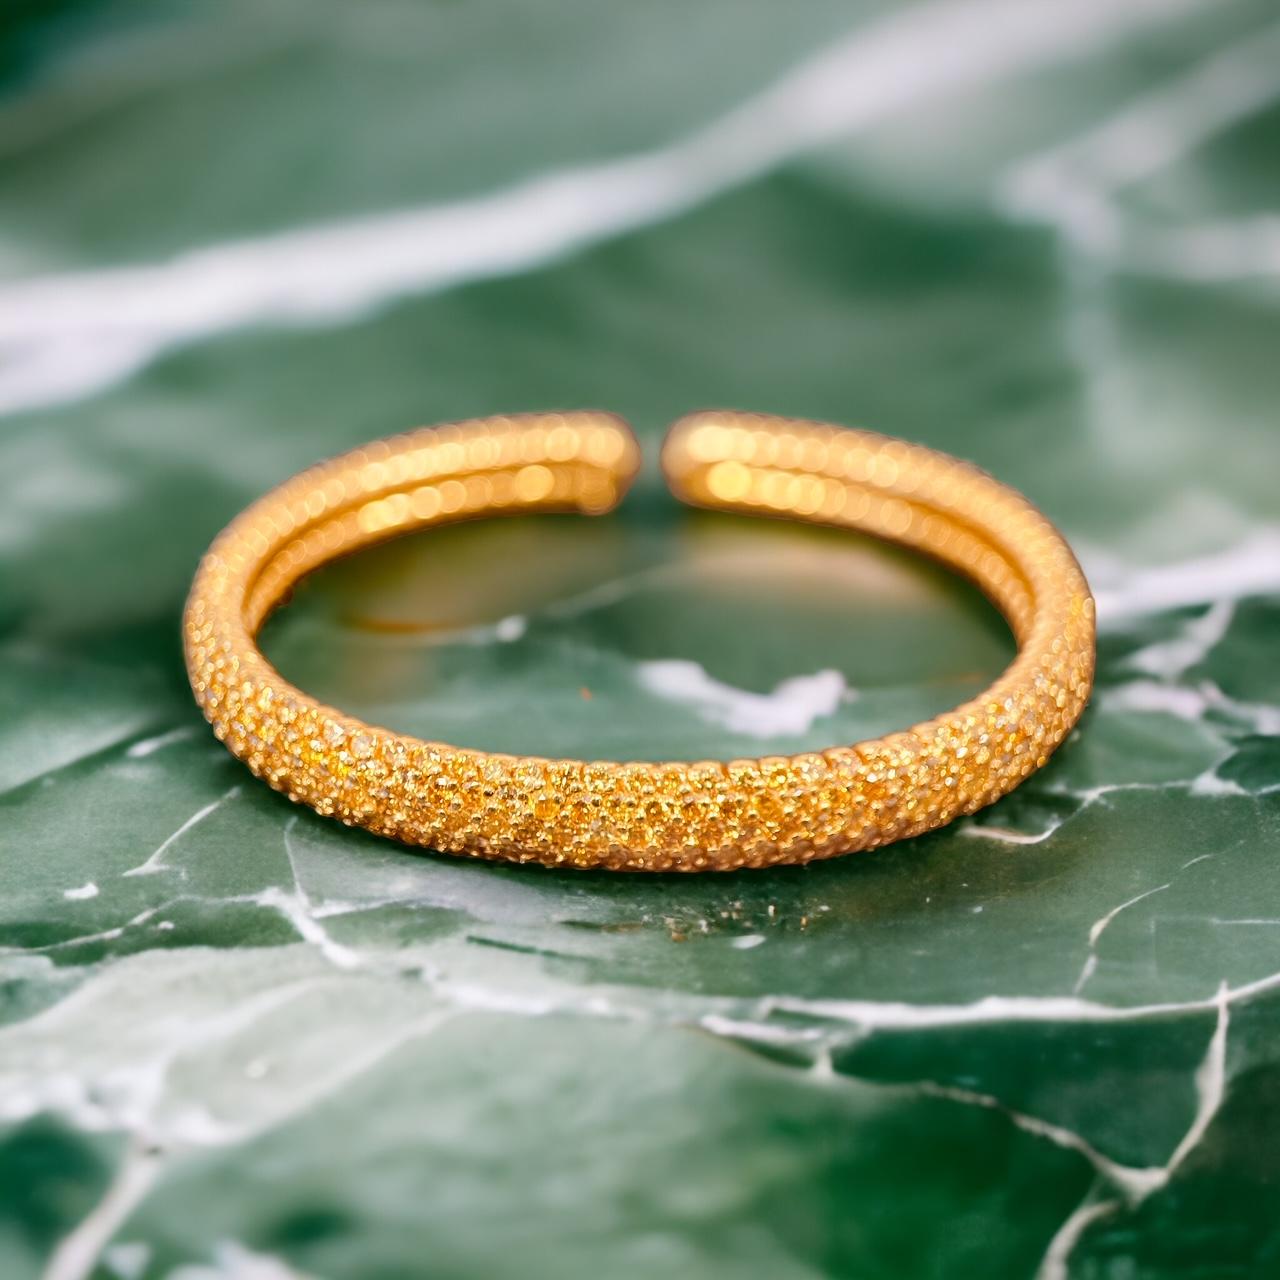 A 12 Carats Pave' Set Fancy Yellow Diamond Bangle, 9mm Width In Excellent Condition For Sale In London, GB